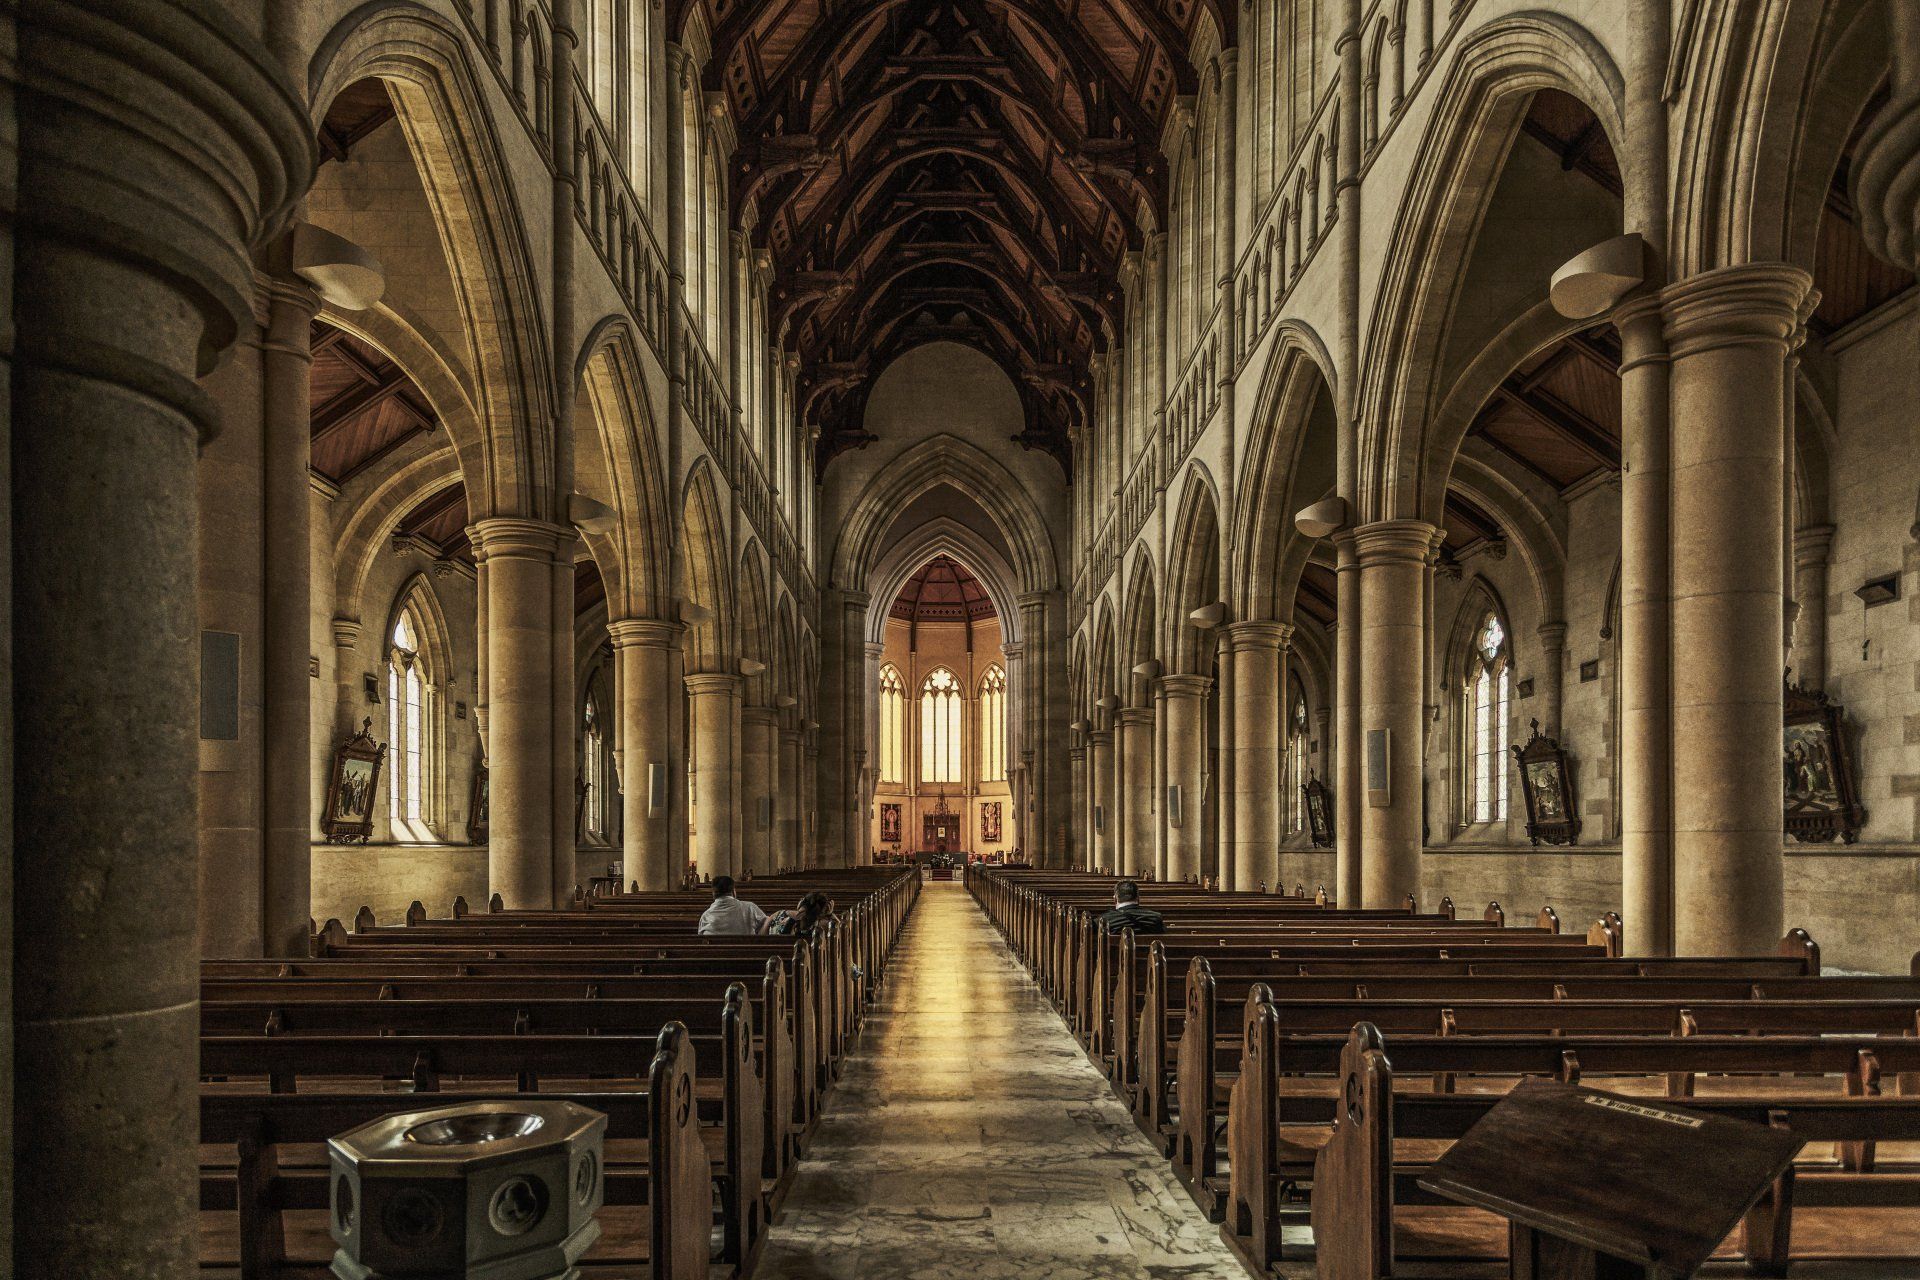 The inside of a church with rows of wooden benches and columns.